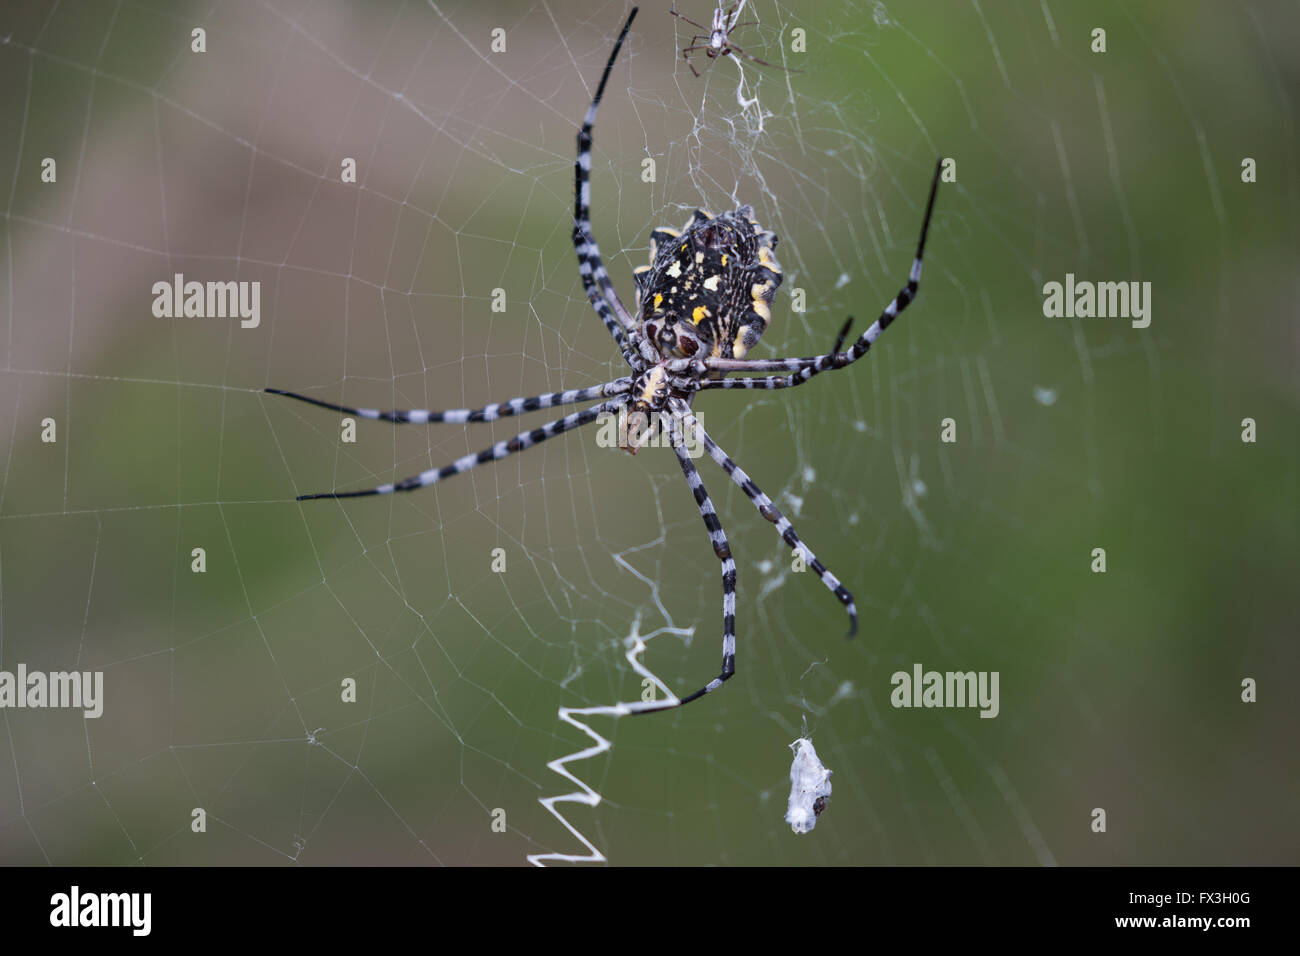 Yellow, white and black orb spider weaves a web Stock Photo